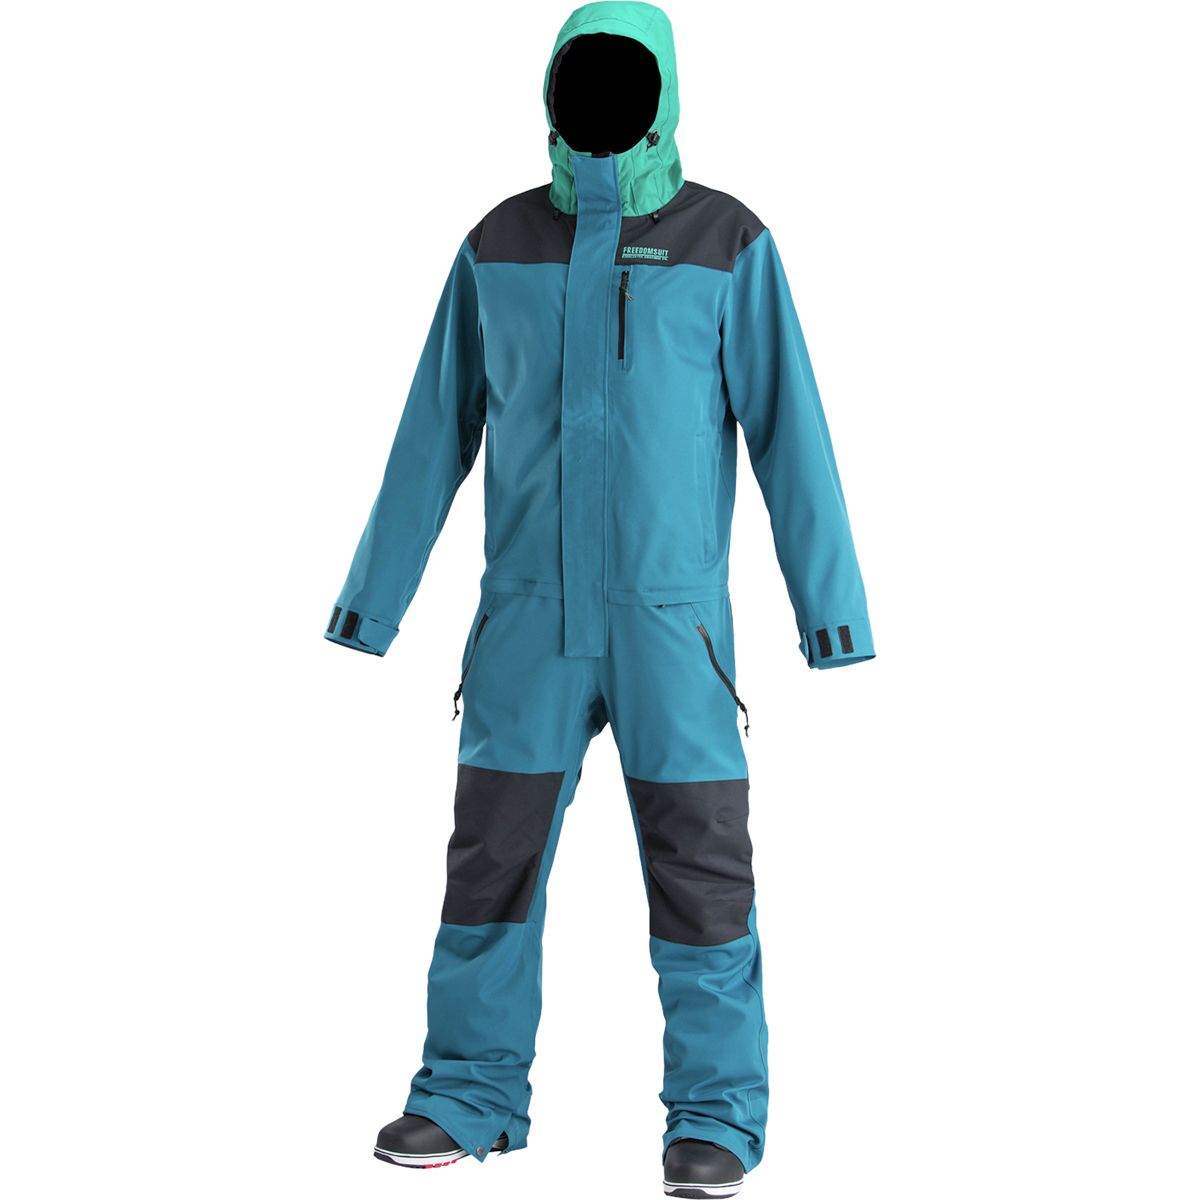 Airblaster Freedom Suit - Men's | Backcountry.com